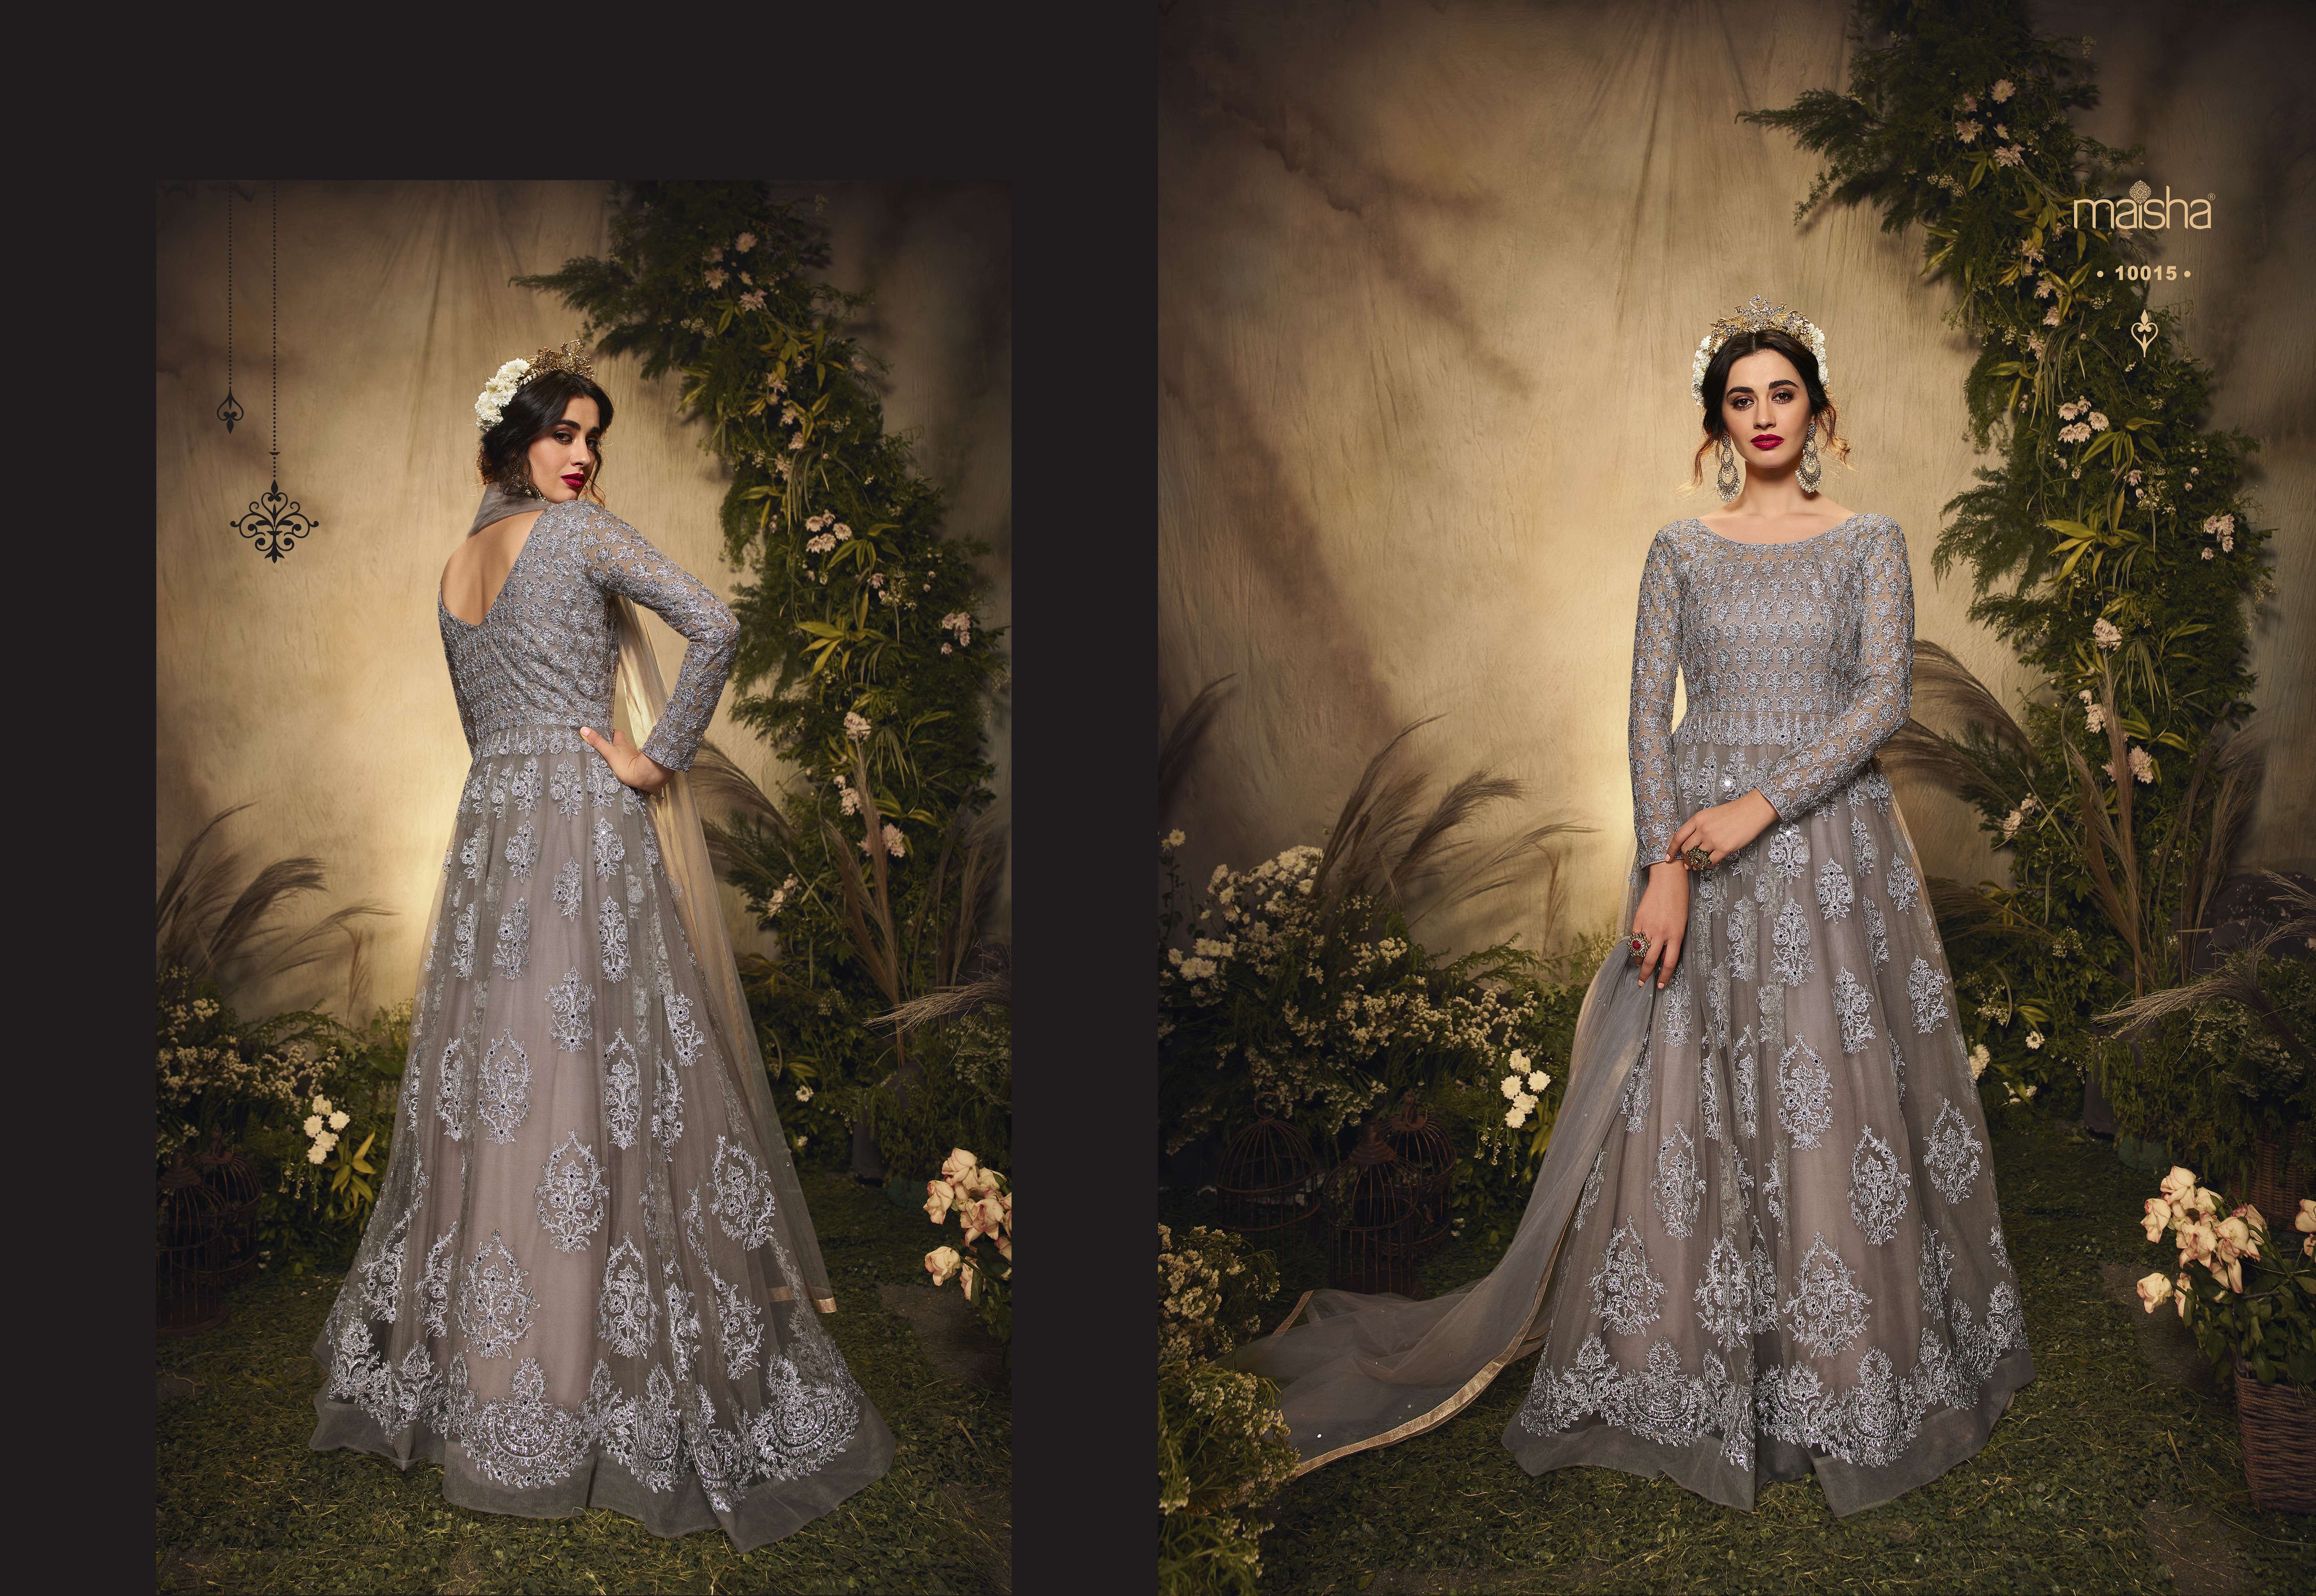 COLOR DESIGNER FANCY WEDDING PARTY WEAR LONG ANARKALI SALWAR SUIT IN NET  FABRIC SEMI STITCHED MATERIAL - shreematee - 4207531